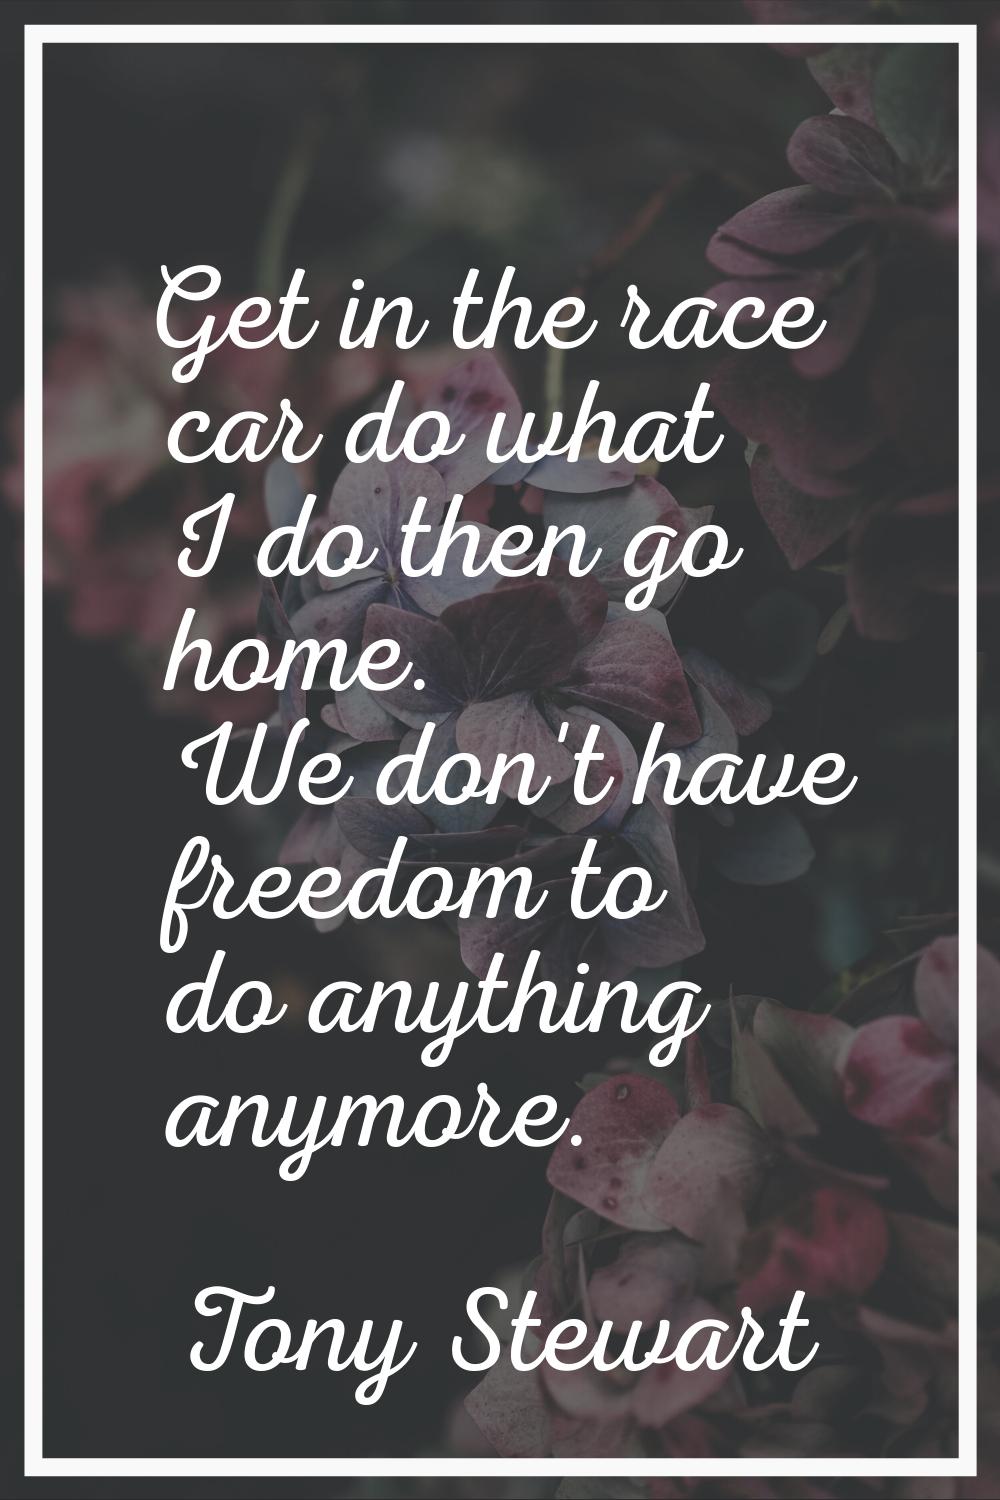 Get in the race car do what I do then go home. We don't have freedom to do anything anymore.